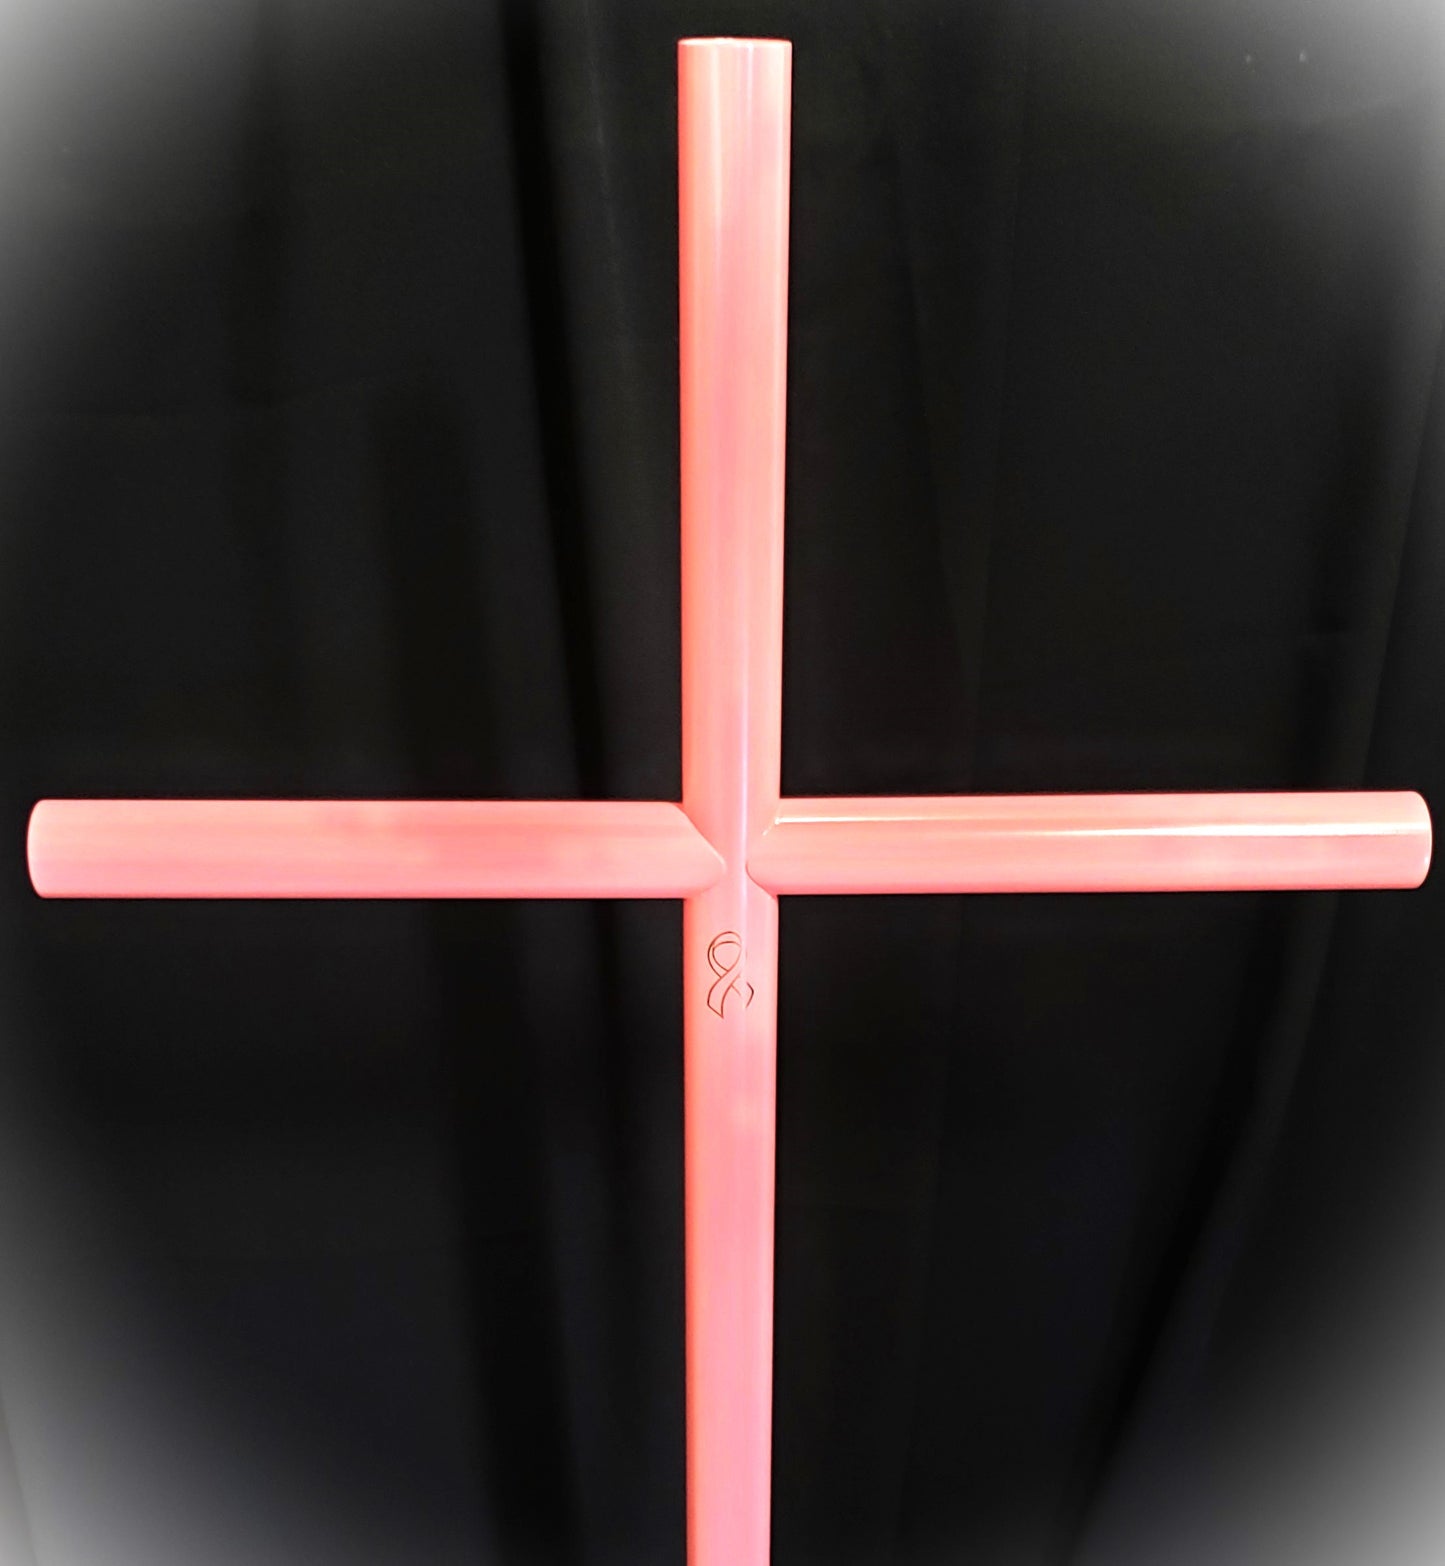 Everlasting Cross In A Pastel Pink Can Express The Softness Of Our Loved One. Timeless Monument Can Be On A Roadside, Grave, Custom Memorial Gift. Engraving, Urn Capsule Cross By State